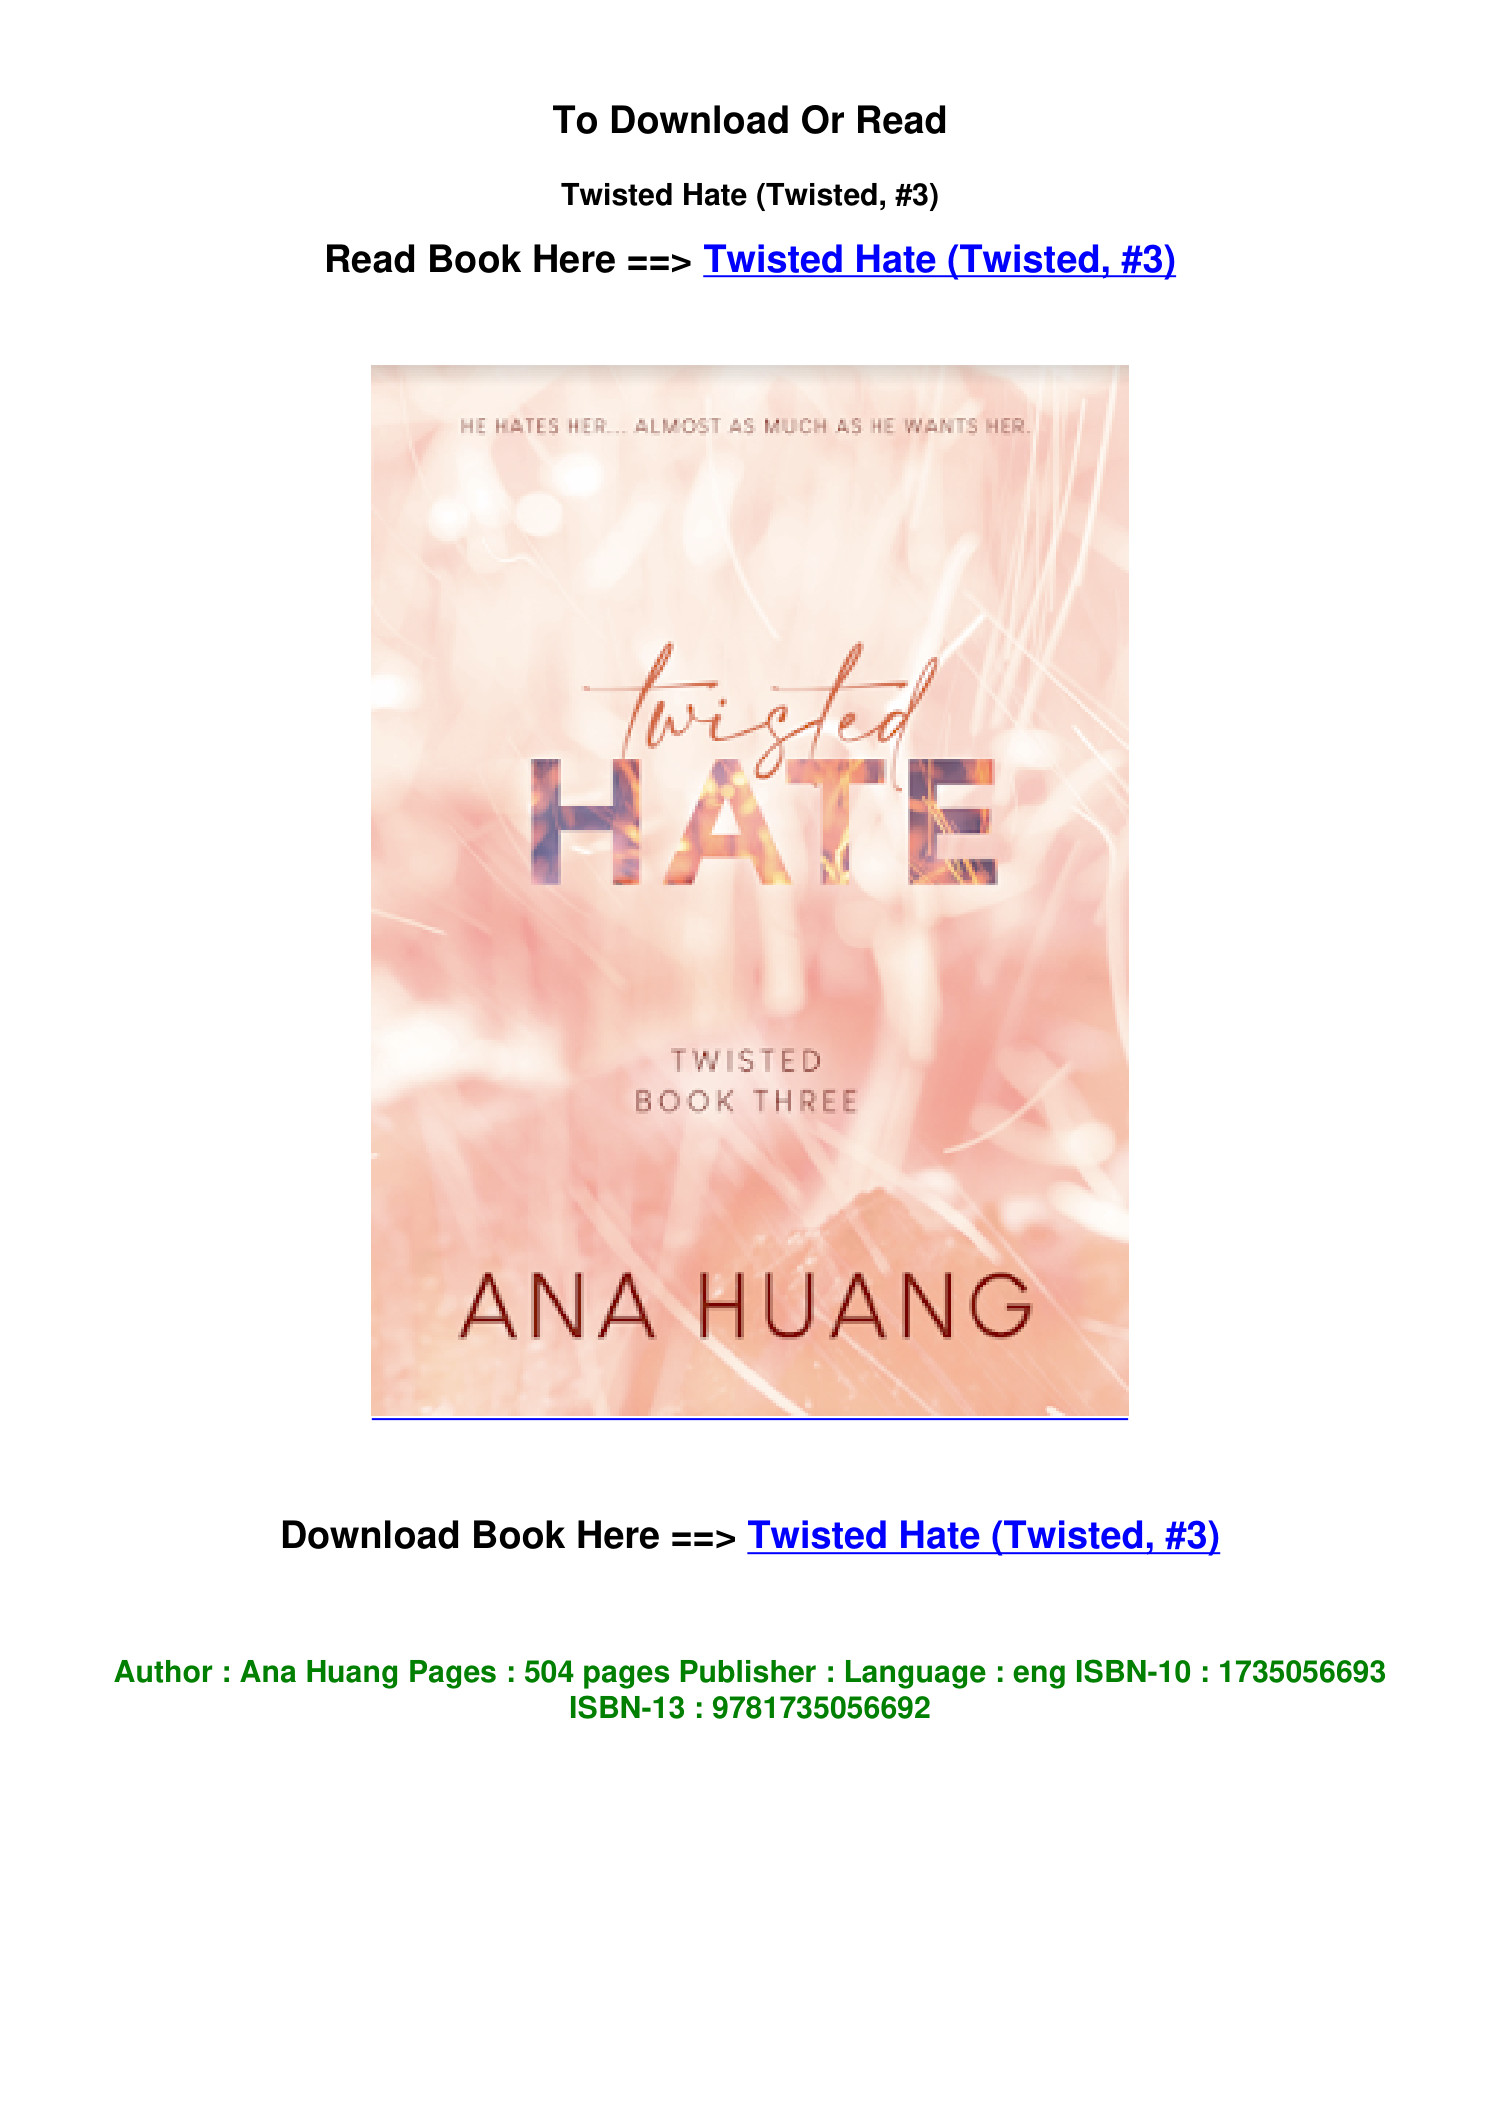 Twisted Hate(Twisted #3) by Ana Huang